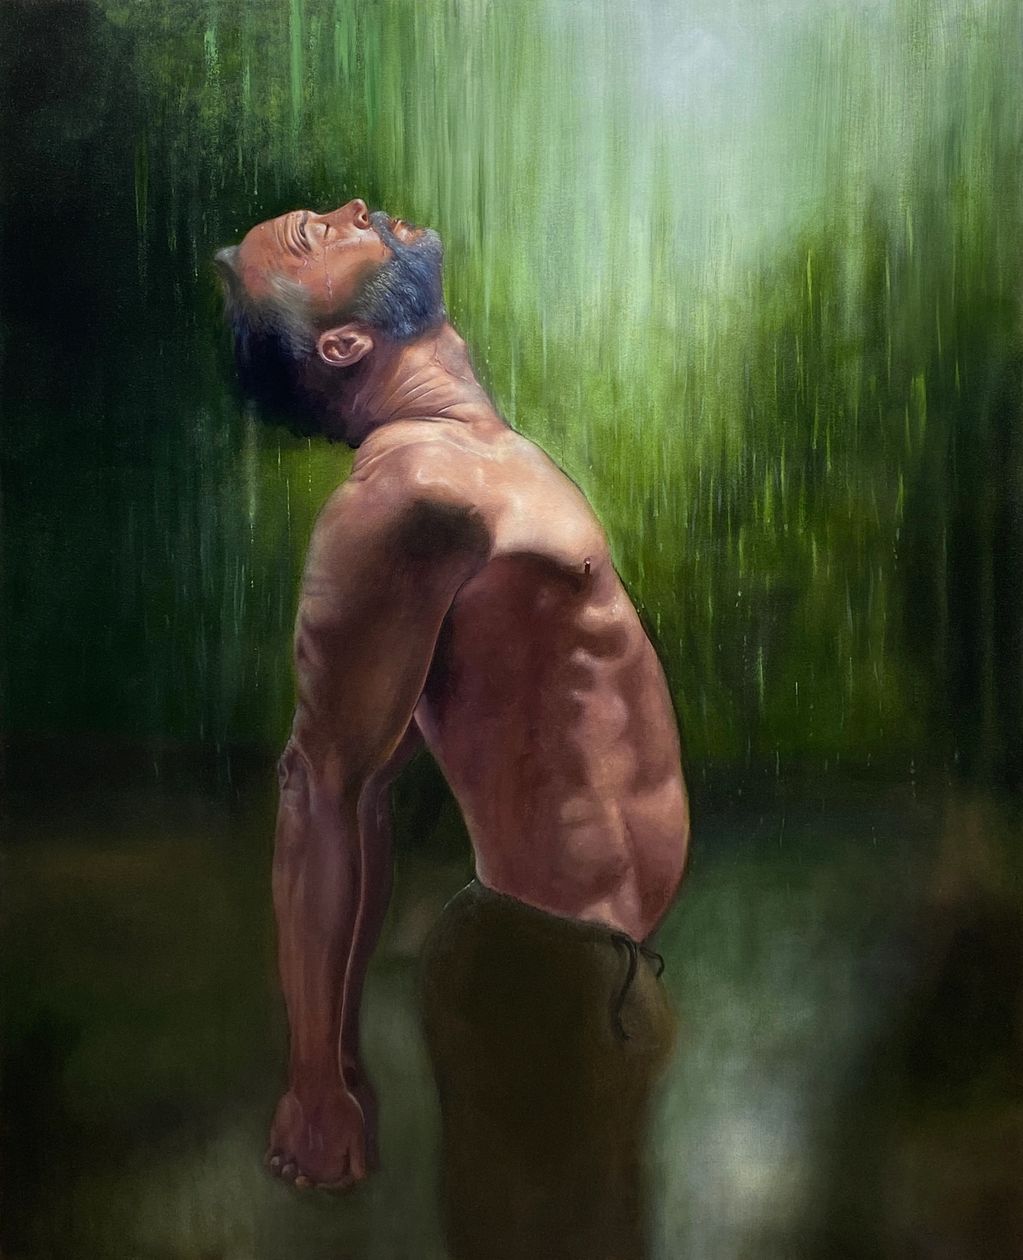 Oil painting of a man in a chest opening yoga pose standing in the rain.